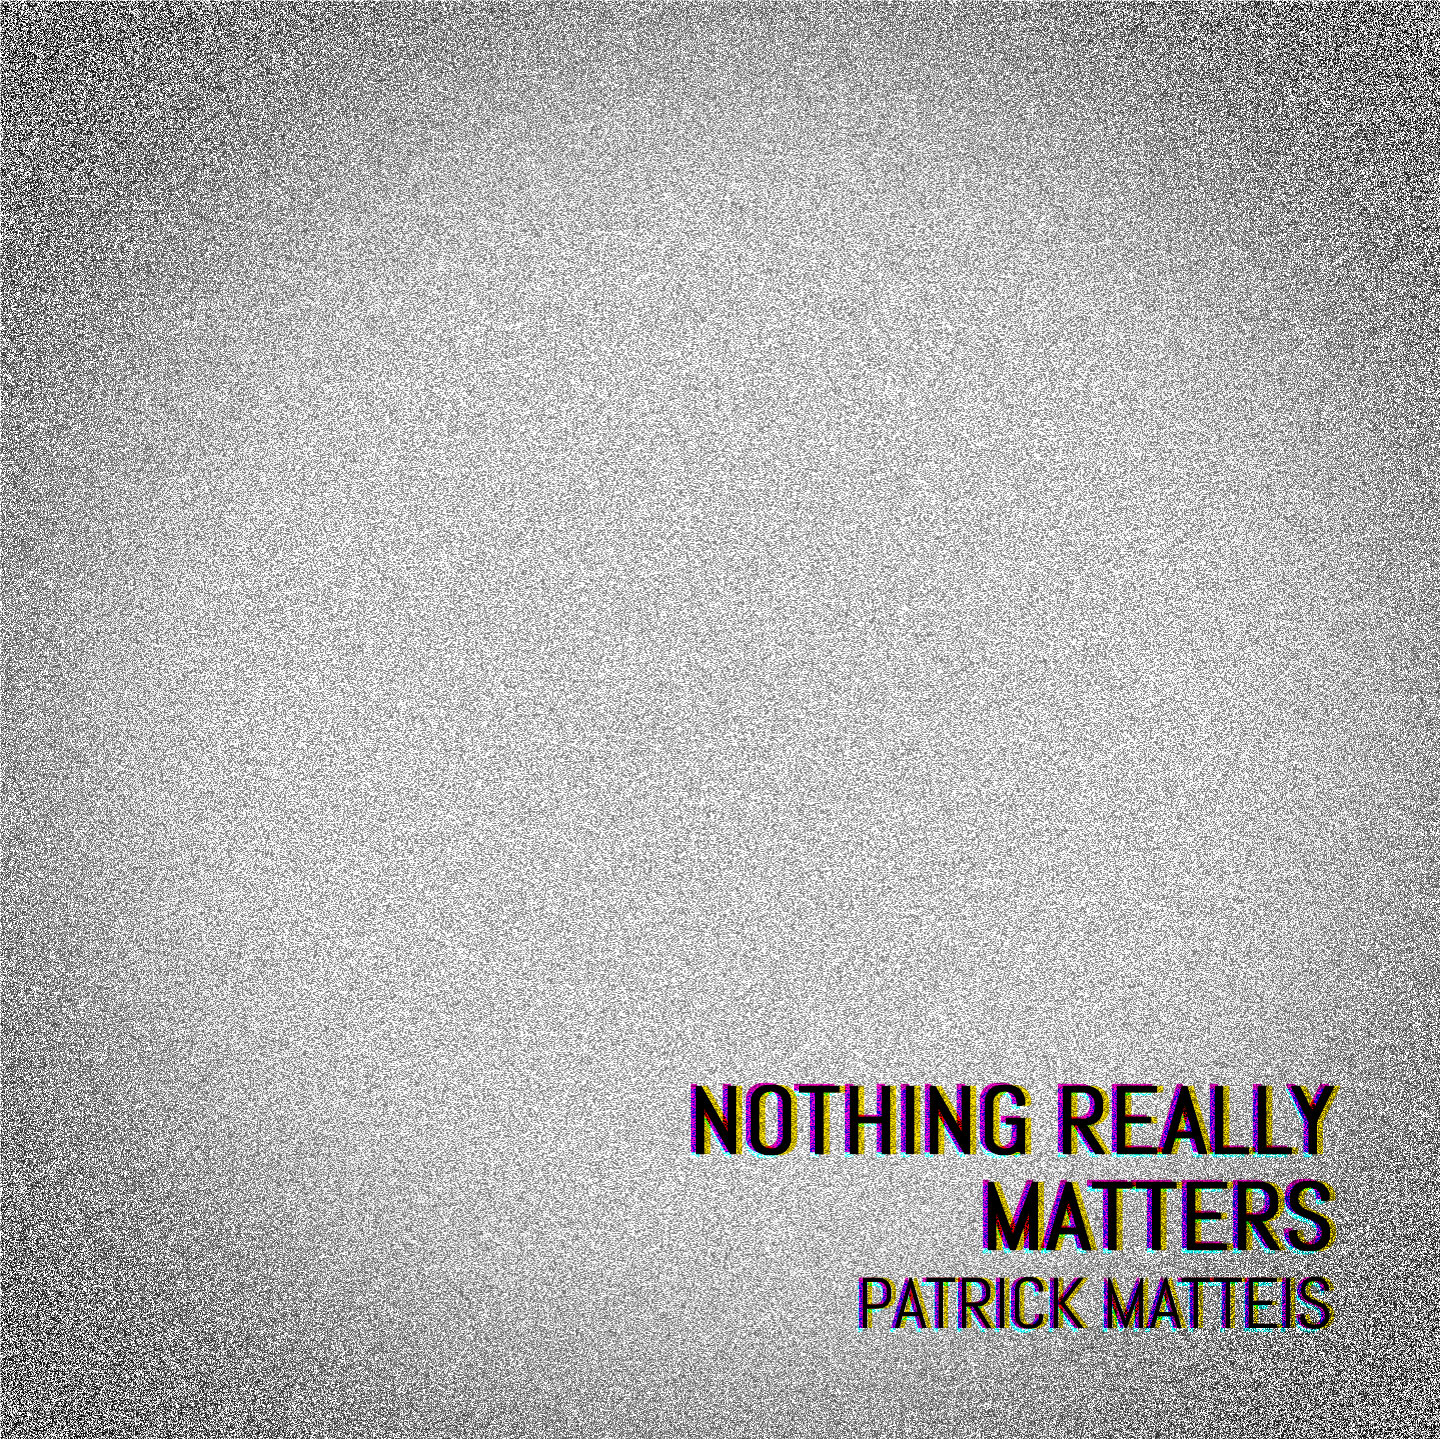 NOTHING REALLY MATTERS